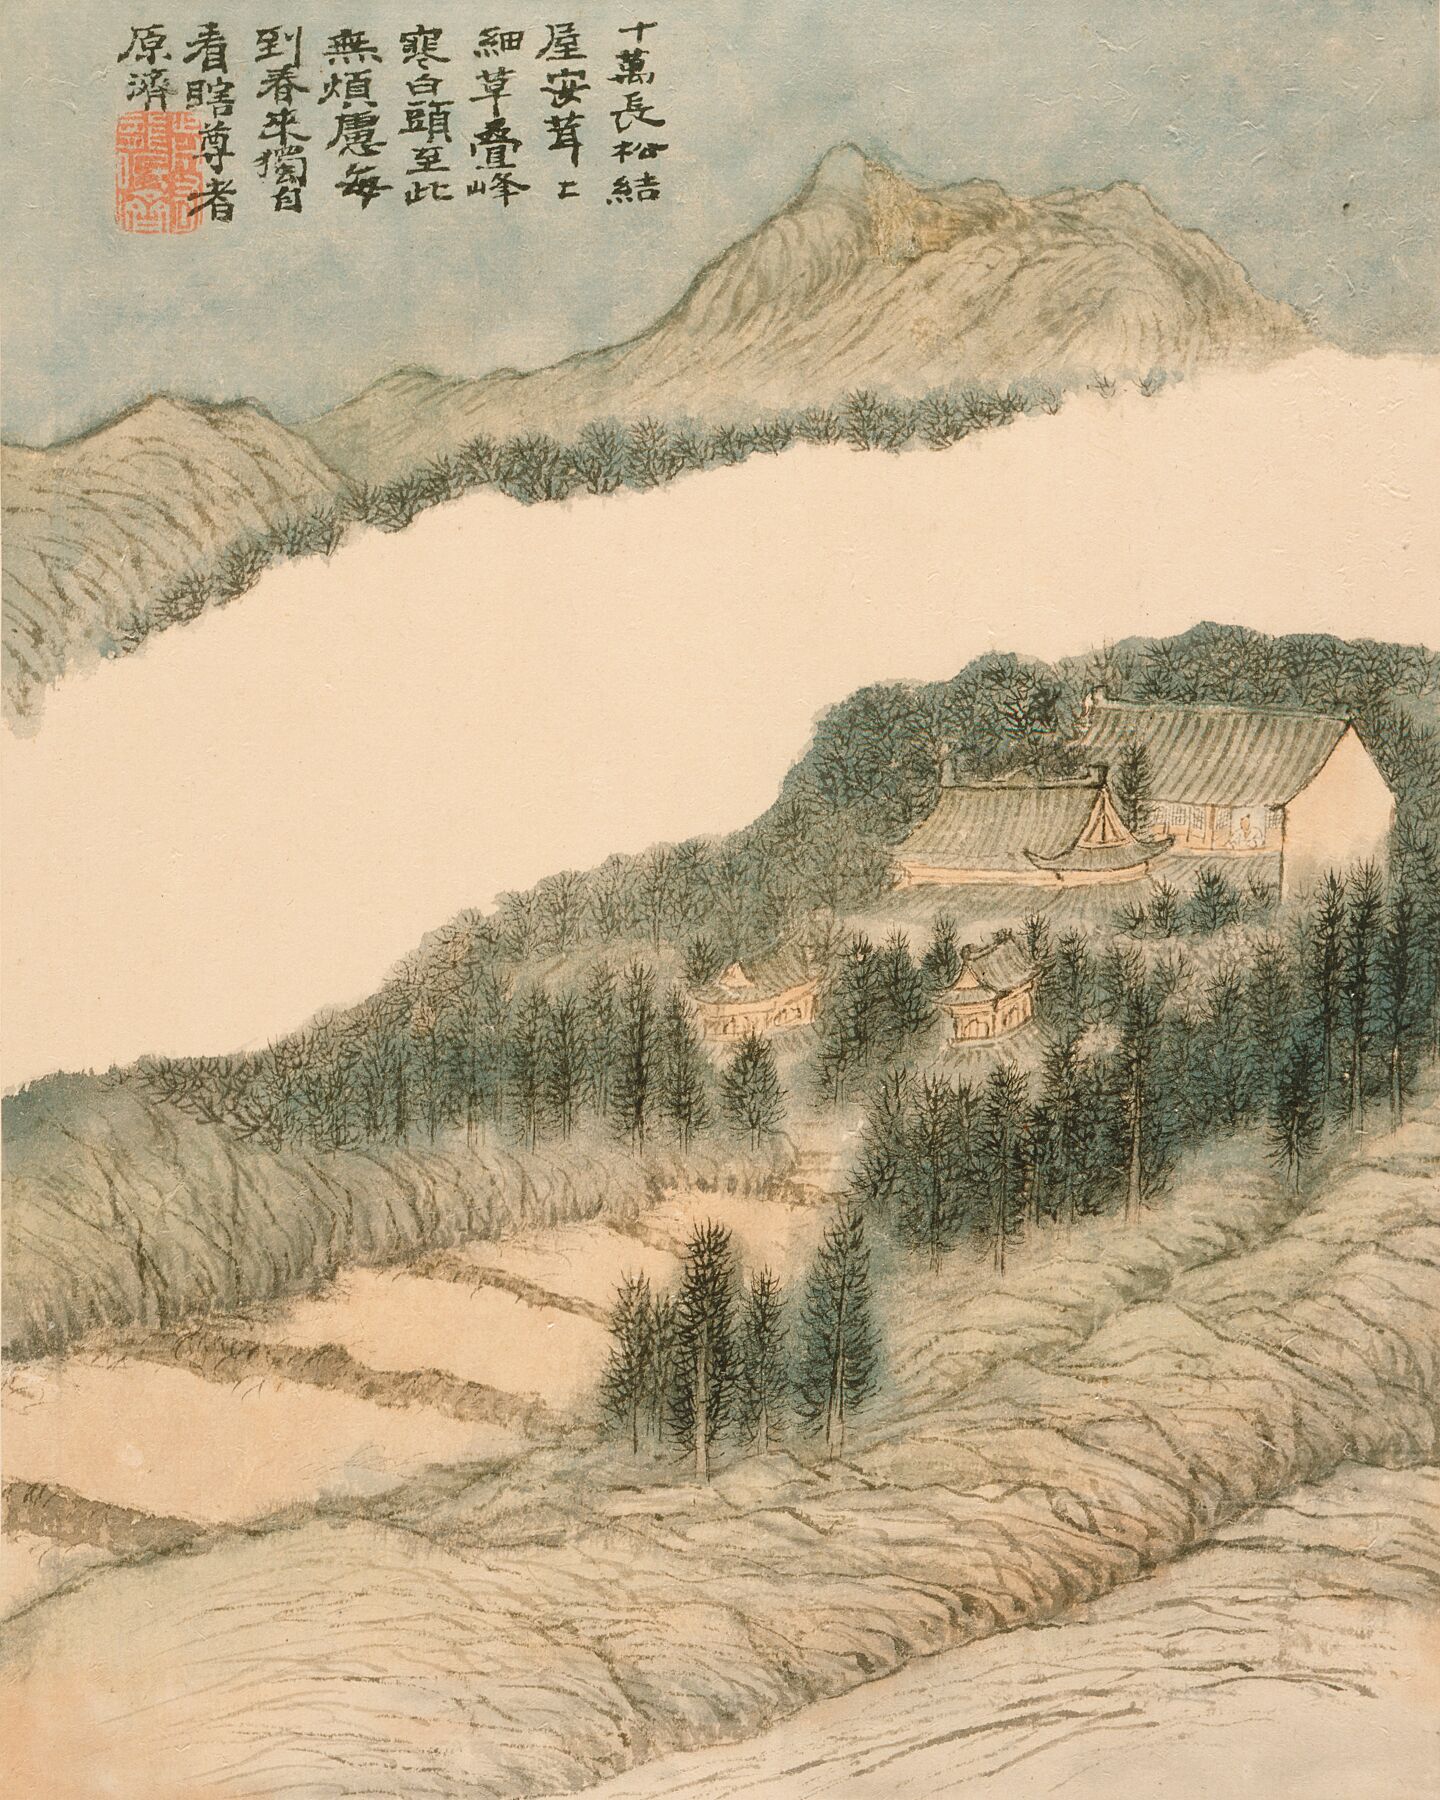 Landscapes by Shitao (China, Guangxi Province, 1642-1707) China, Chinese, Qing dynasty, dated 1694. Eight-leaf album, ink and color on paper.